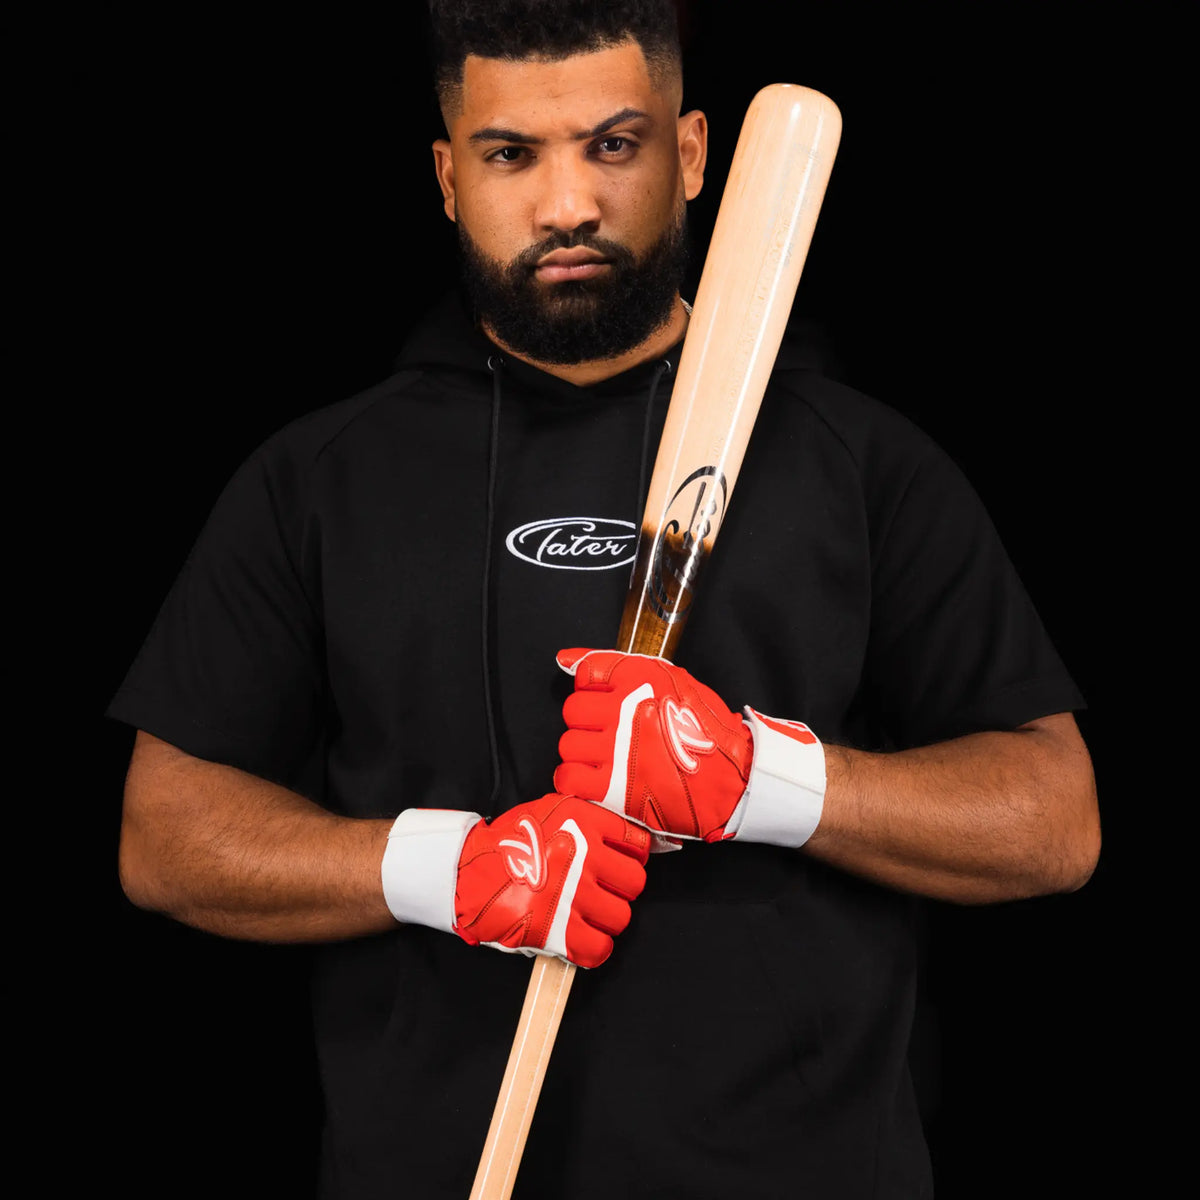 The image shows a focused baseball player, Aaron Bracho, in a black Tater Baseball shirt, confidently holding a Tater X12 Pro Maple bat over his shoulder. He&#39;s wearing striking red batting gloves with long straps, ready to step up to the plate.